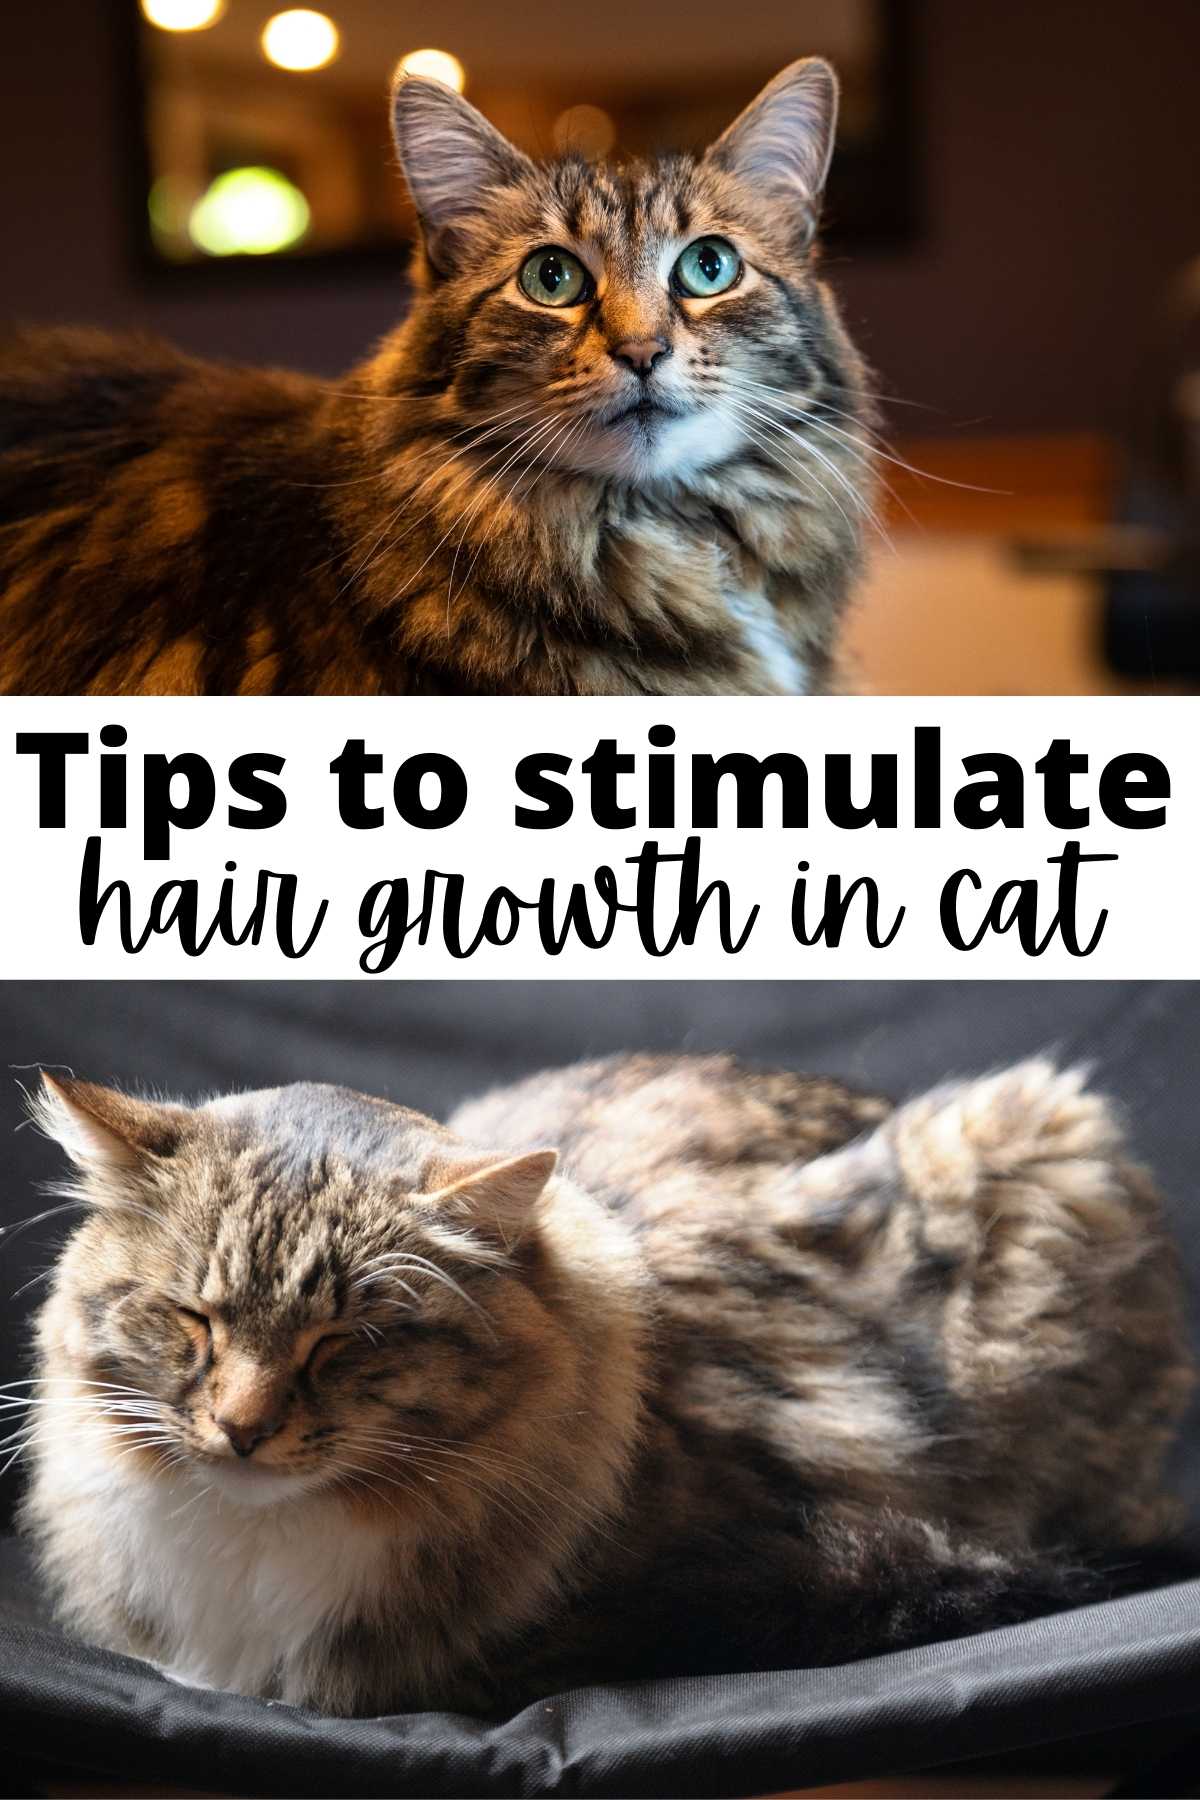 Tips to Stimulate Hair Growth in Cats